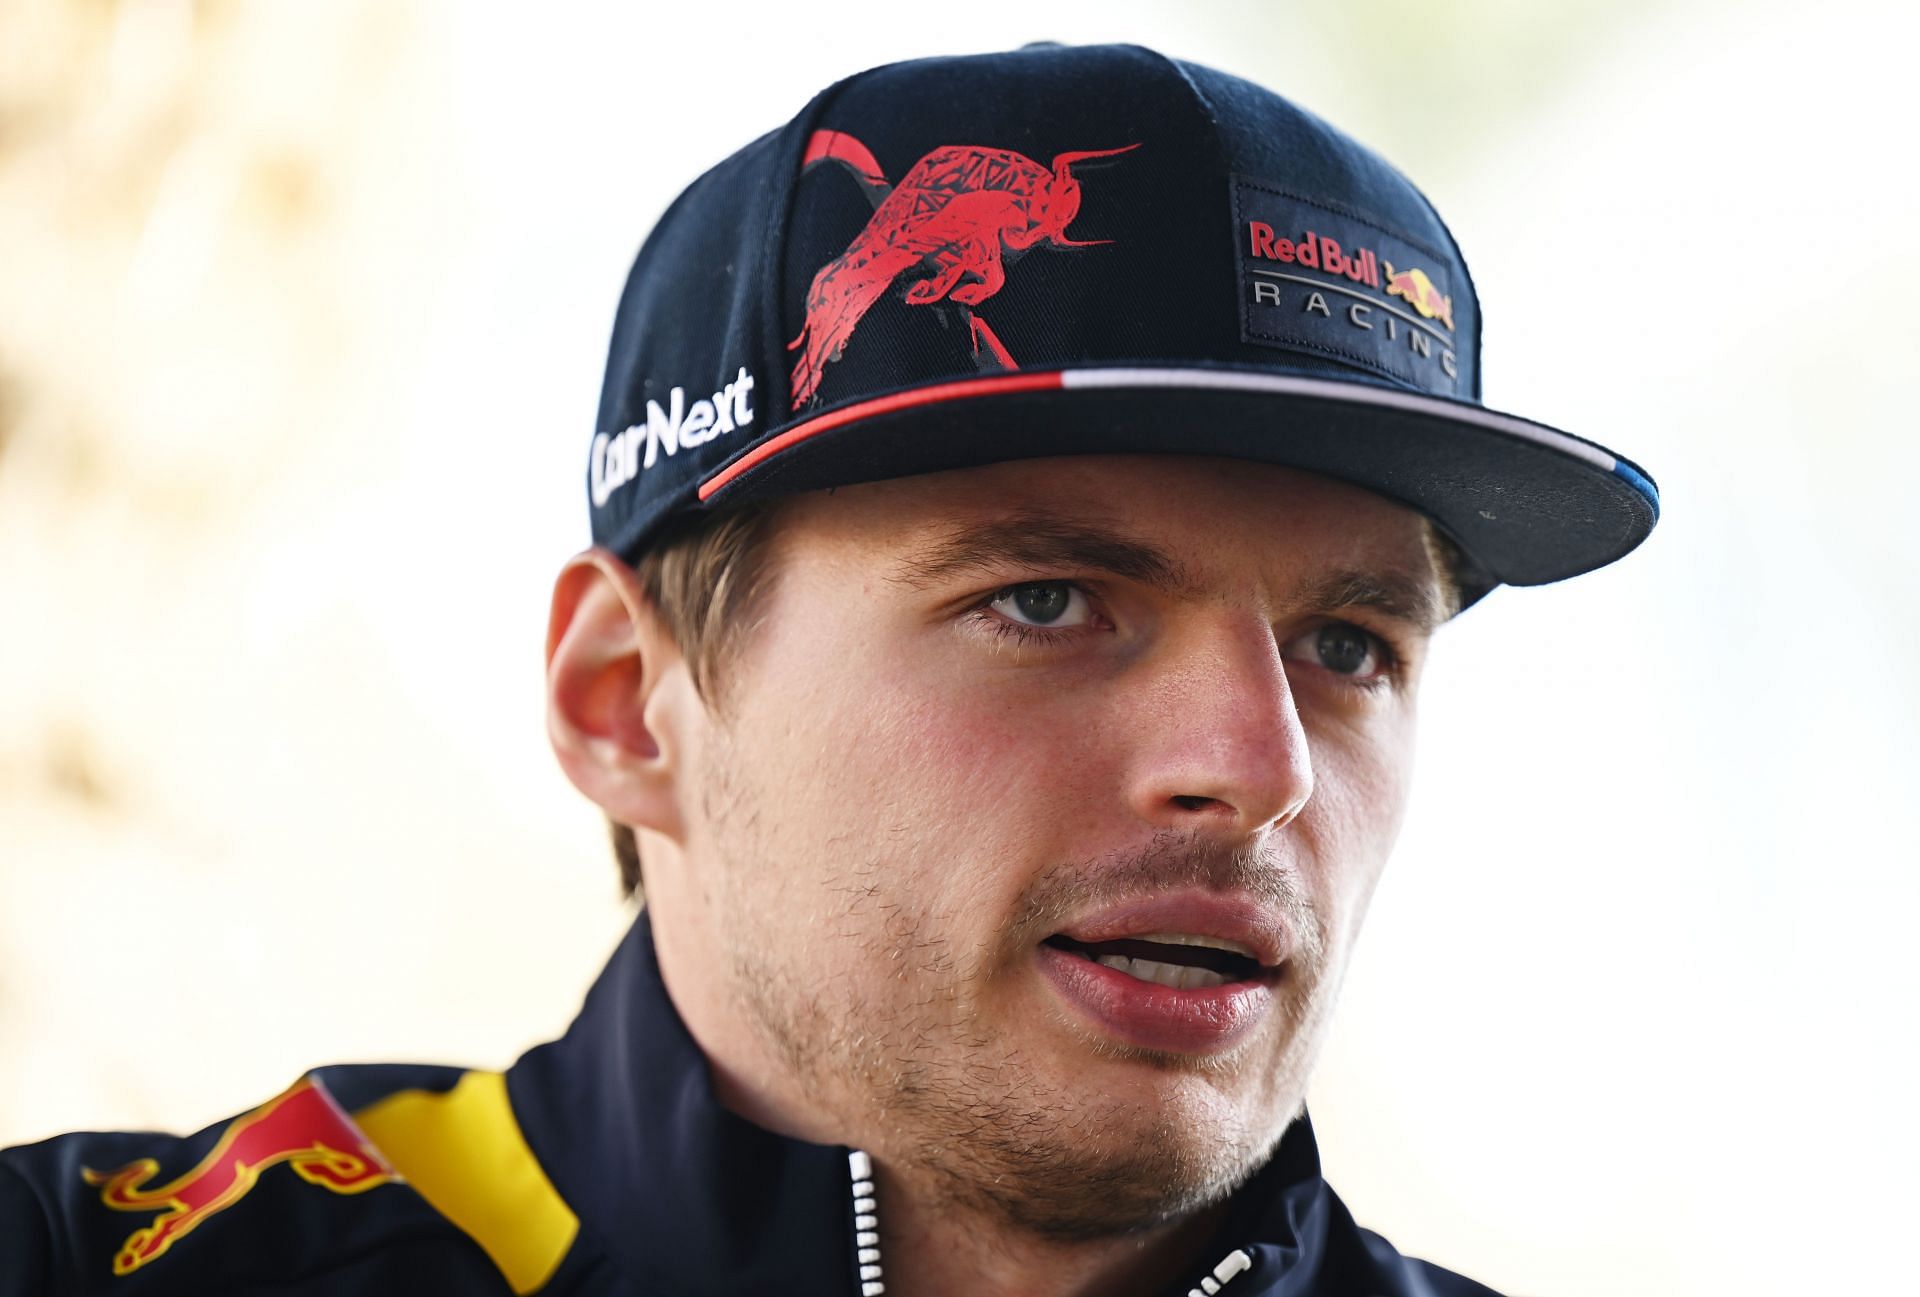 Max Verstappen looks on in the Paddock during previews ahead of the F1 Grand Prix of Bahrain (Photo by Clive Mason/Getty Images)